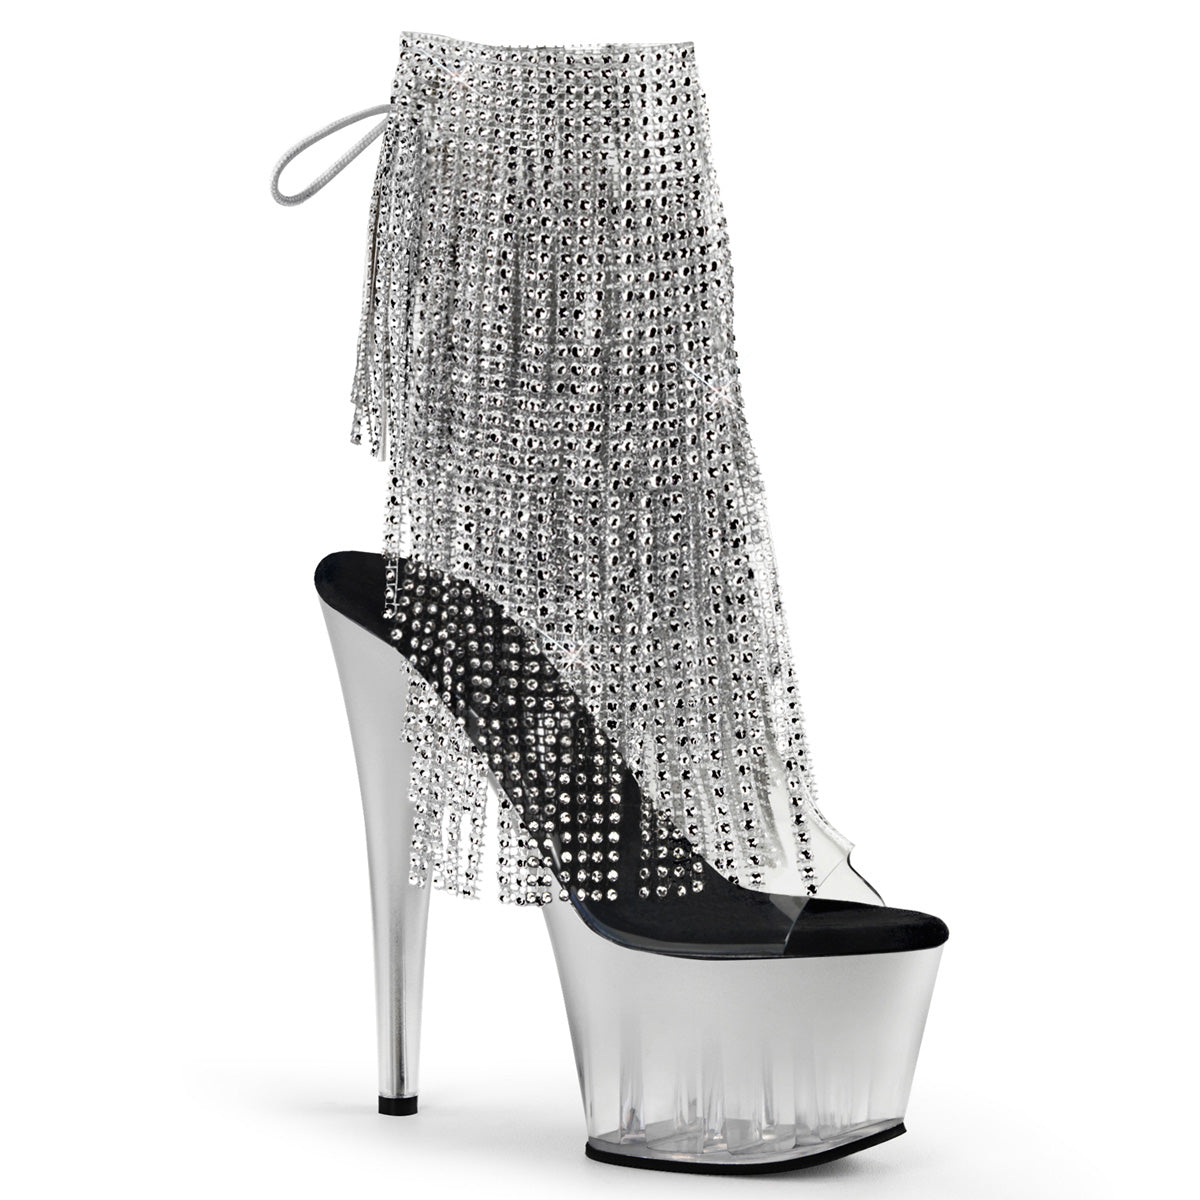 Adore-1017rsft 7 "Heel Clear Silver Strippers Boots glezna